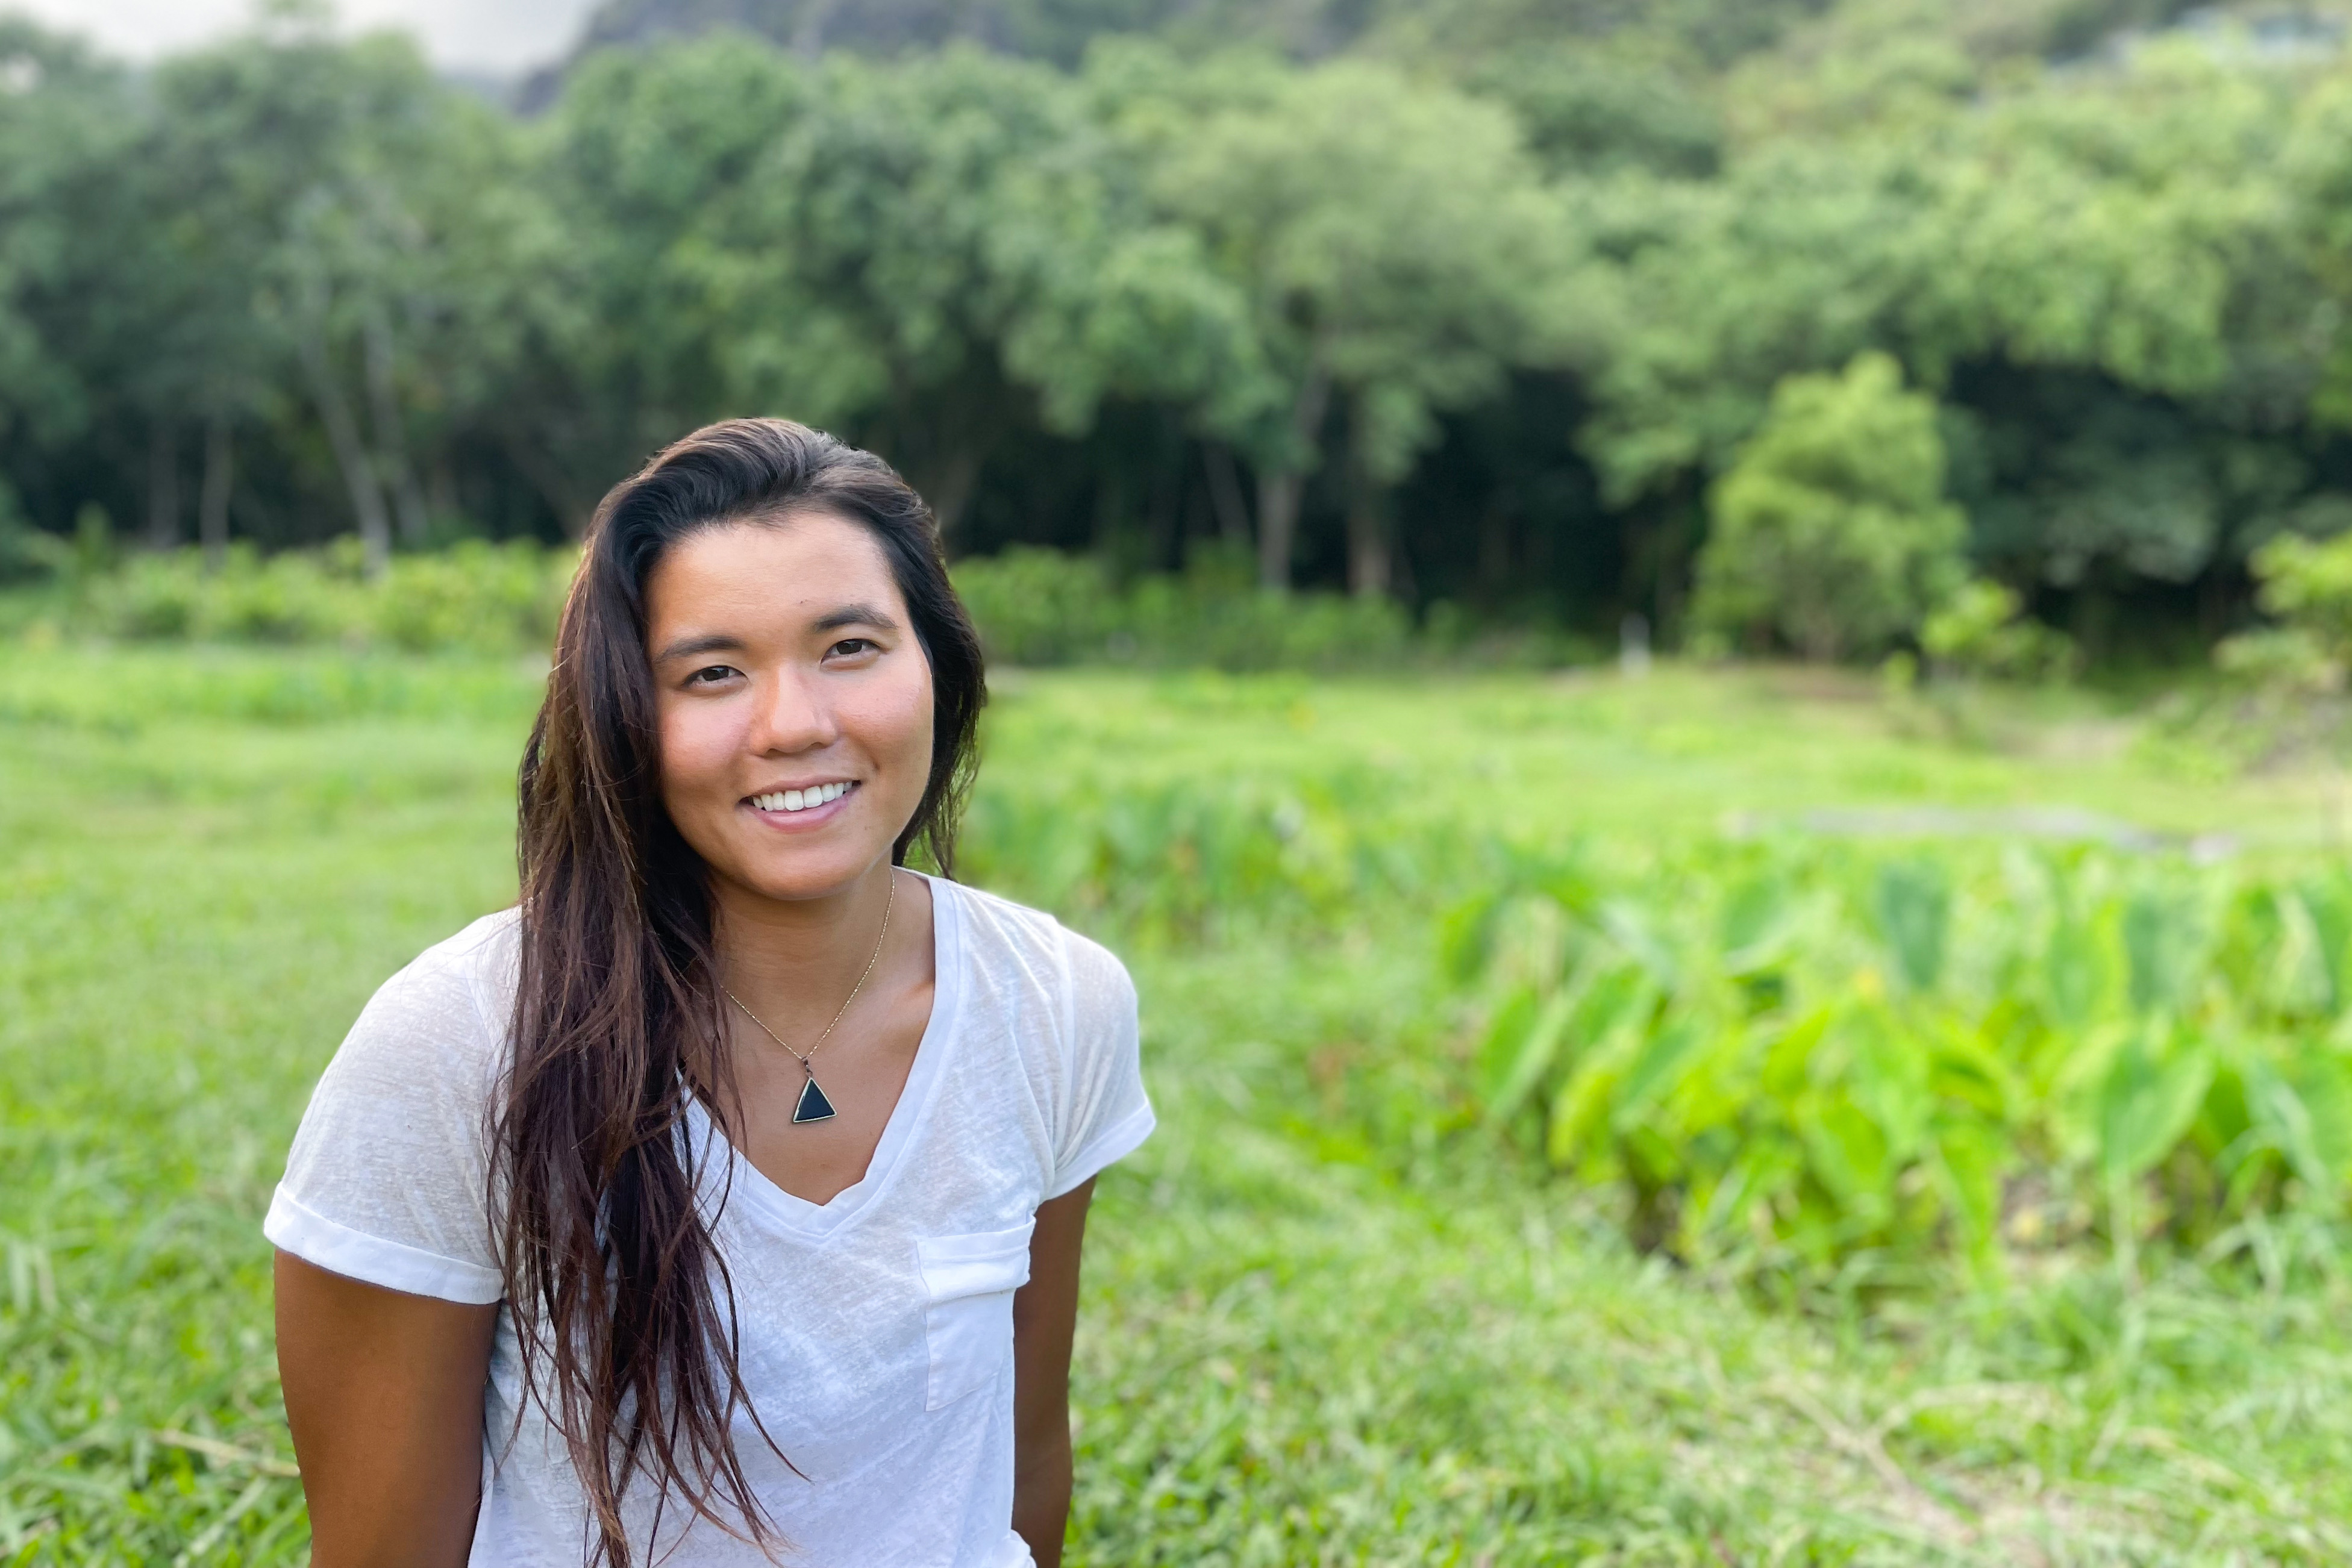 Aja Grande is now a PhD candidate in MIT’s HASTS (History, Anthropology, Science, Technology and Society) program, and part of her dissertation tracks how Hawaiian culture and people’s relationship with the land has evolved throughout time. 